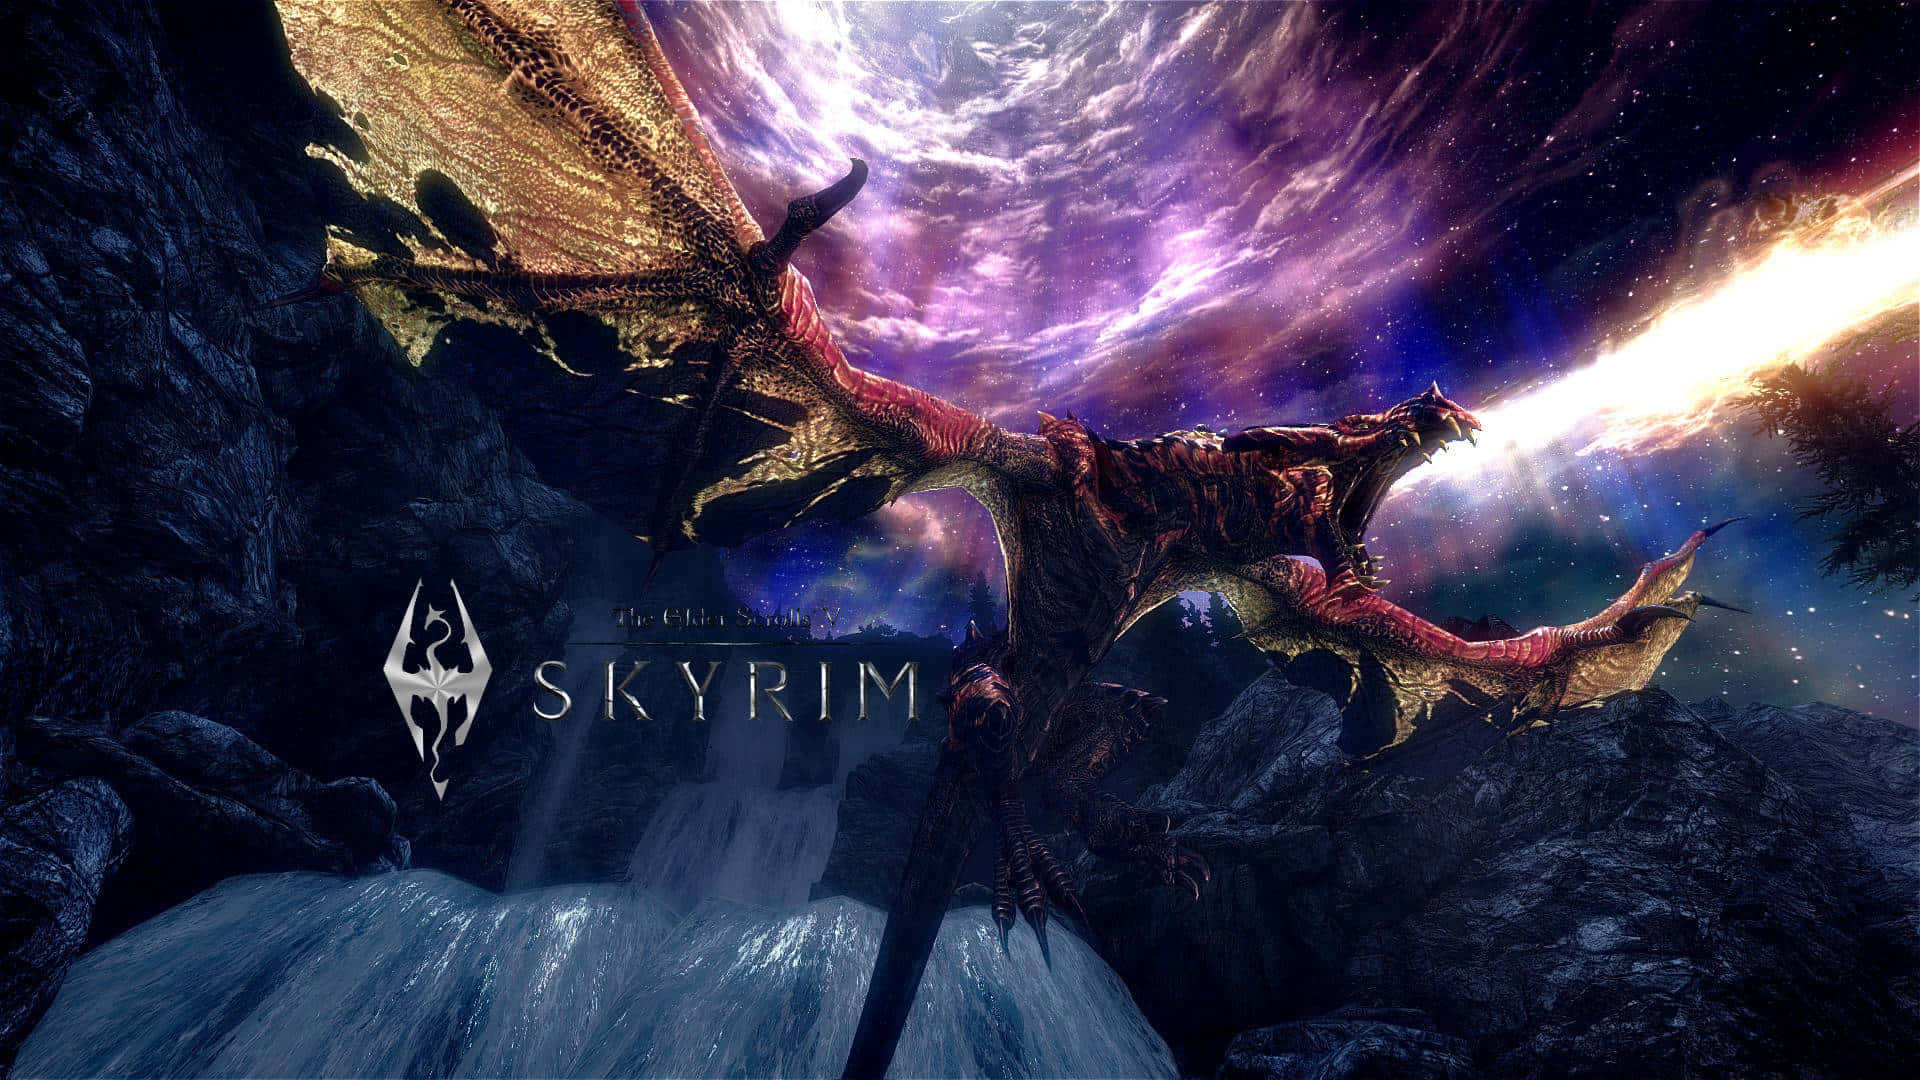 Caption: Majestic Dragon soars above the snowy mountains of Skyrim